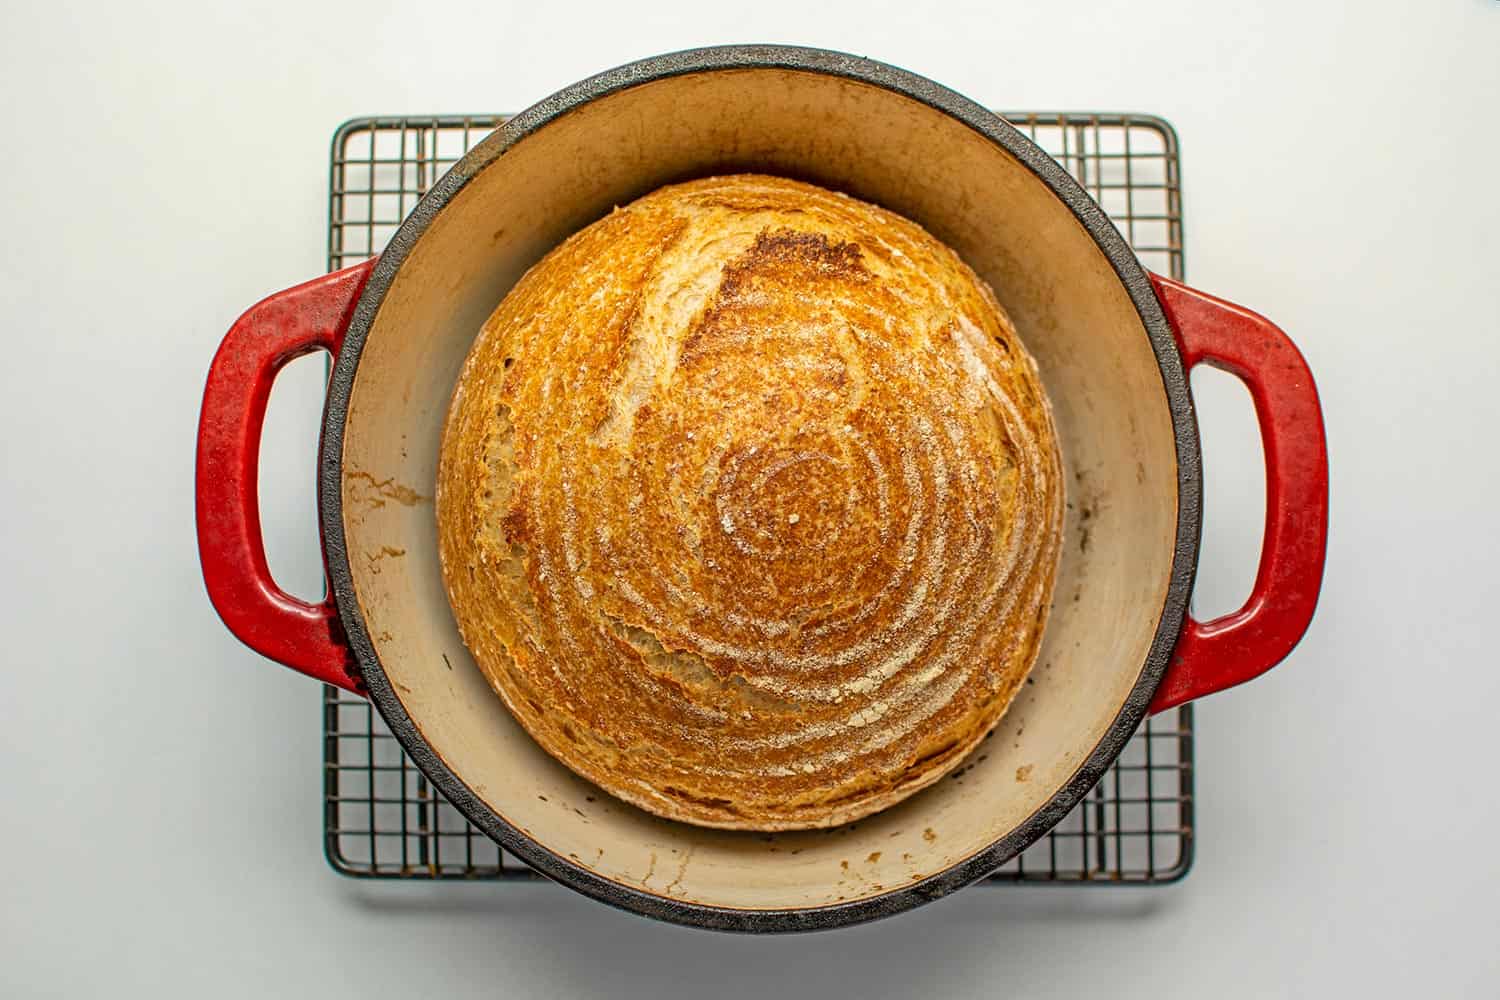 Whole wheat bread baked in dutch oven cast iron